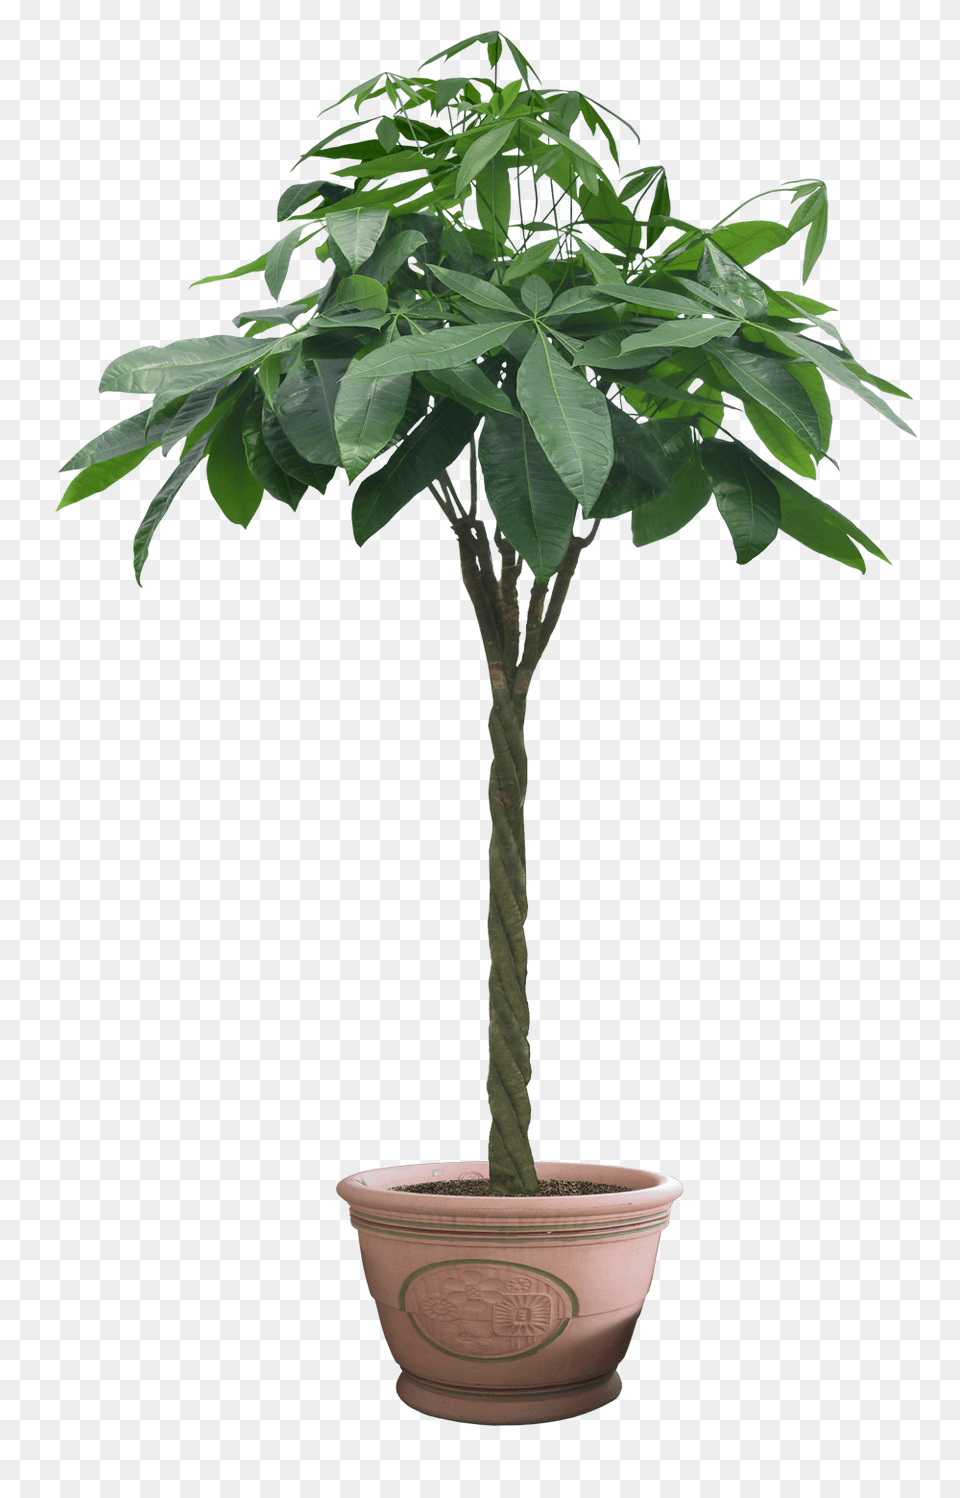 Plant Potted Flower Image Potted Tree, Leaf, Potted Plant, Bonsai Free Transparent Png